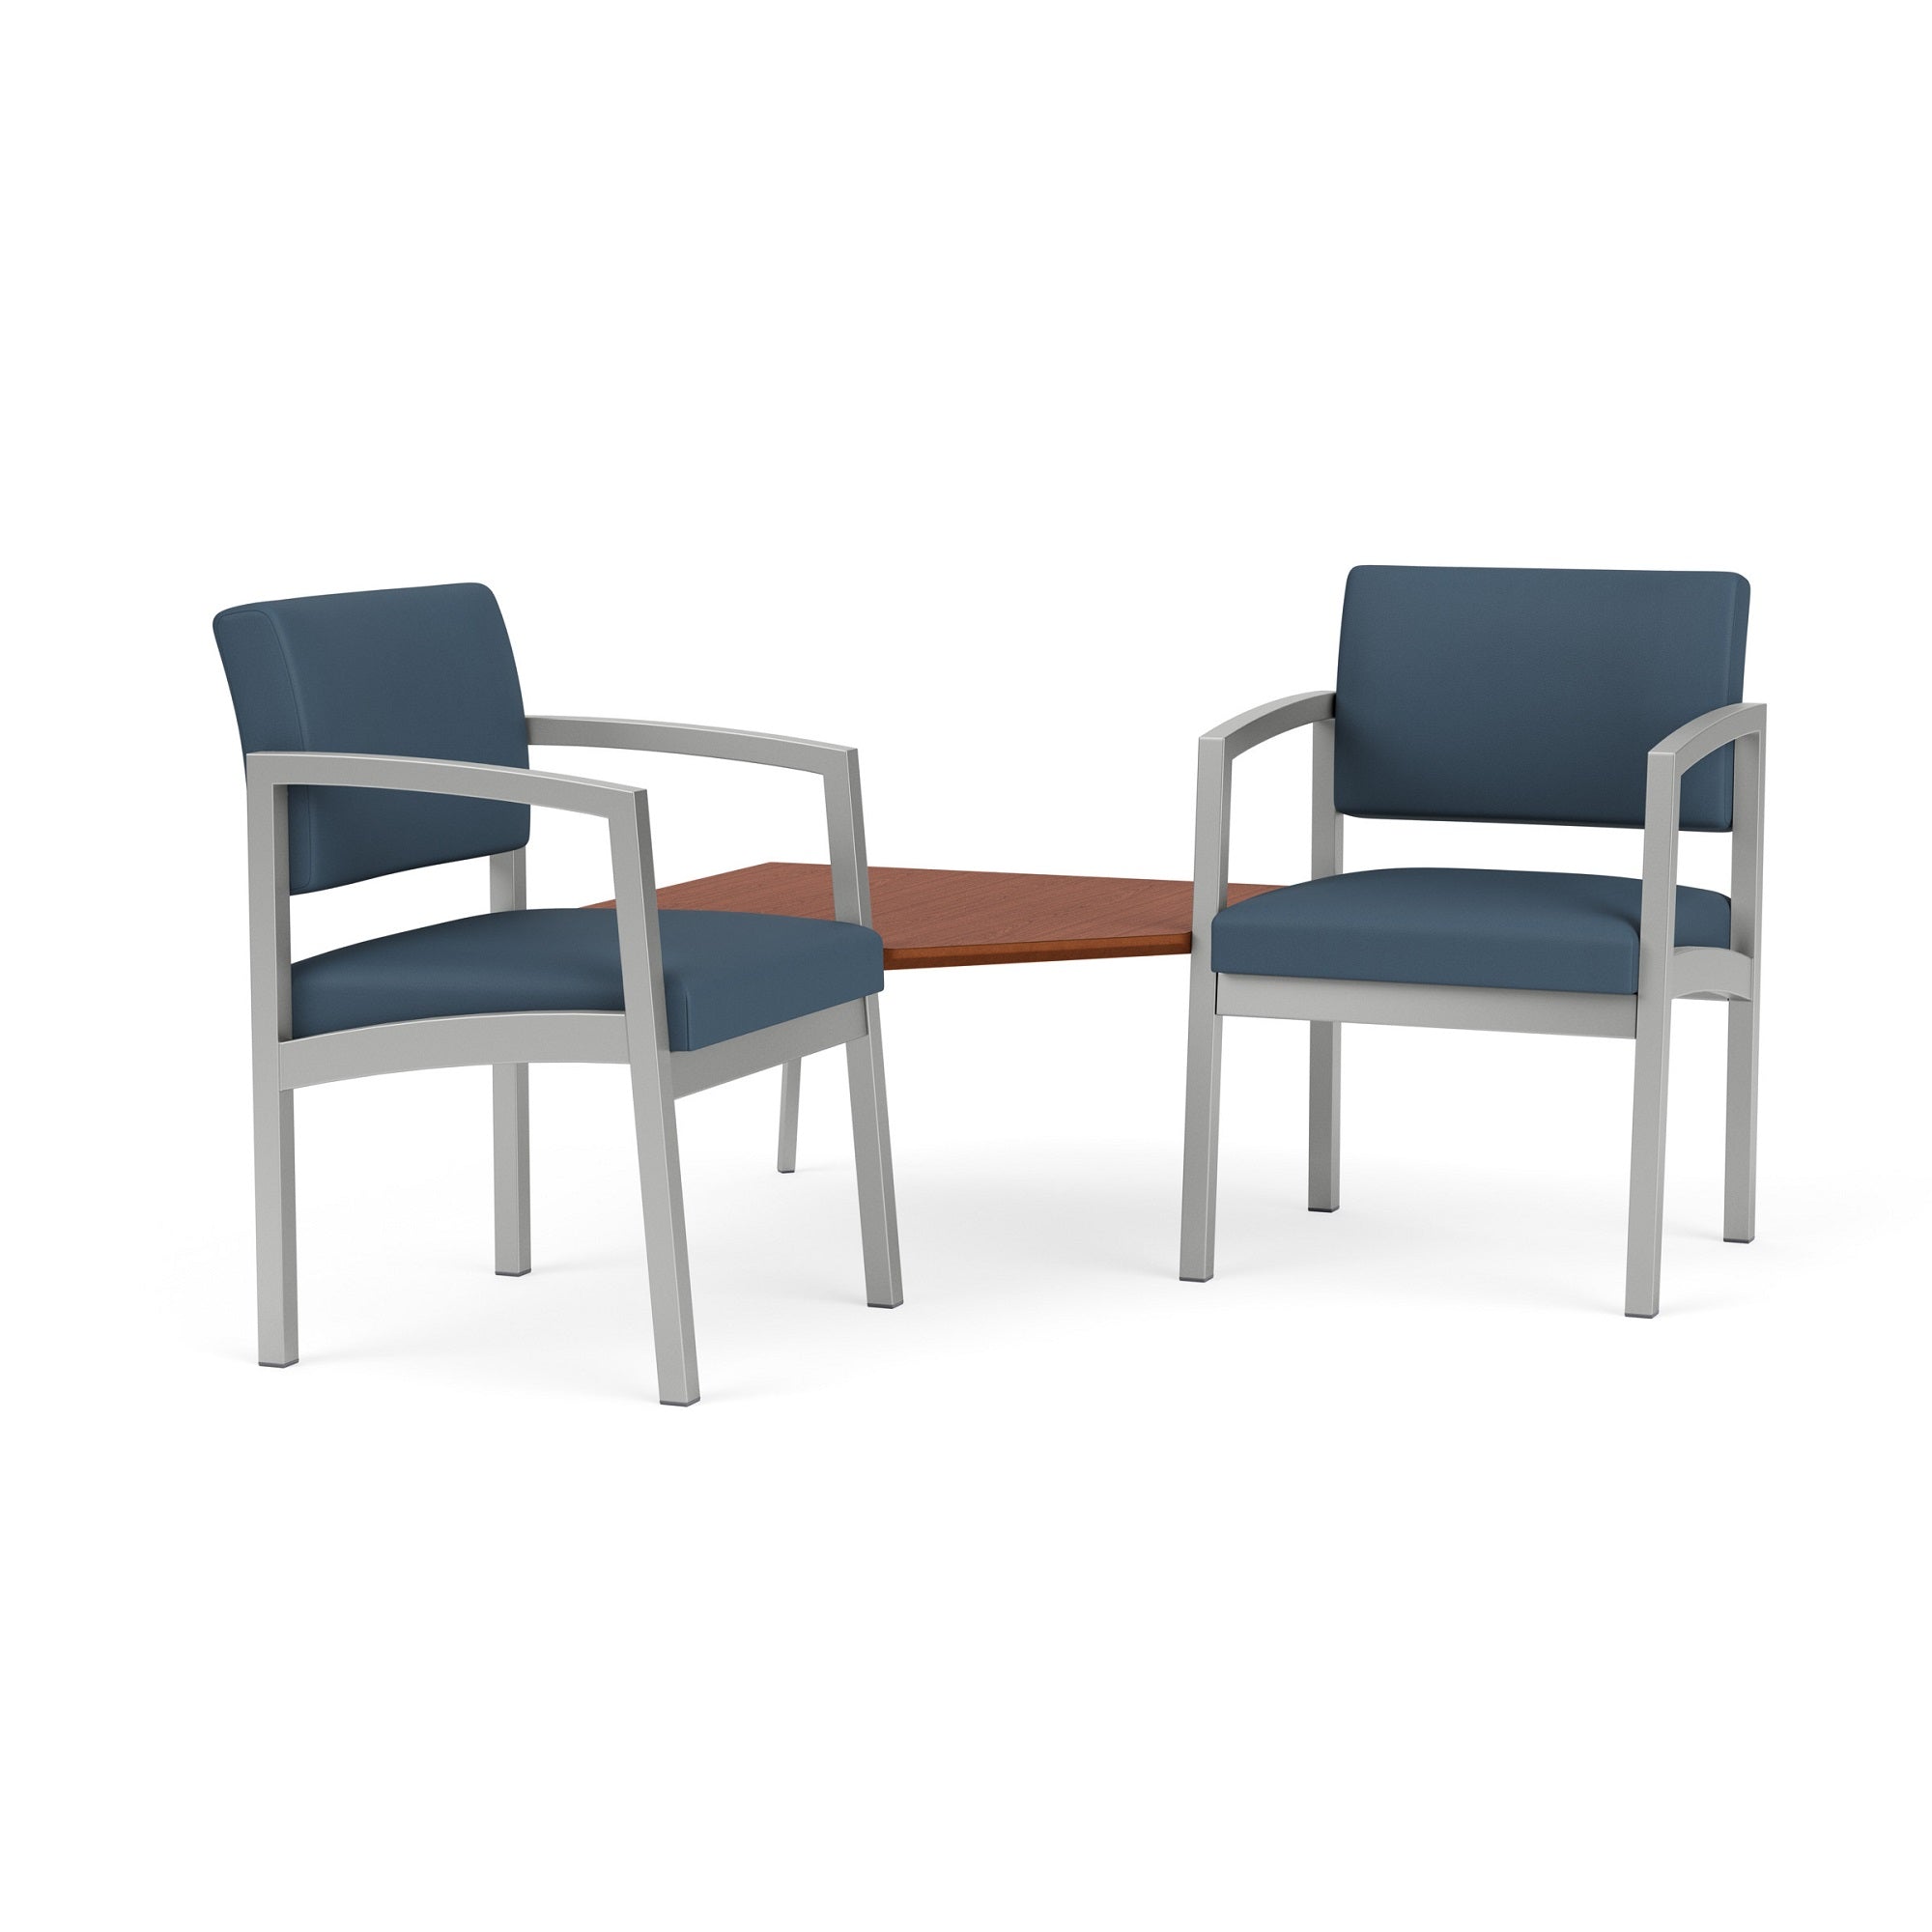 Lenox Steel Collection Reception Seating, 2 Chairs with Connecting Corner Table, Healthcare Vinyl Upholstery, FREE SHIPPING